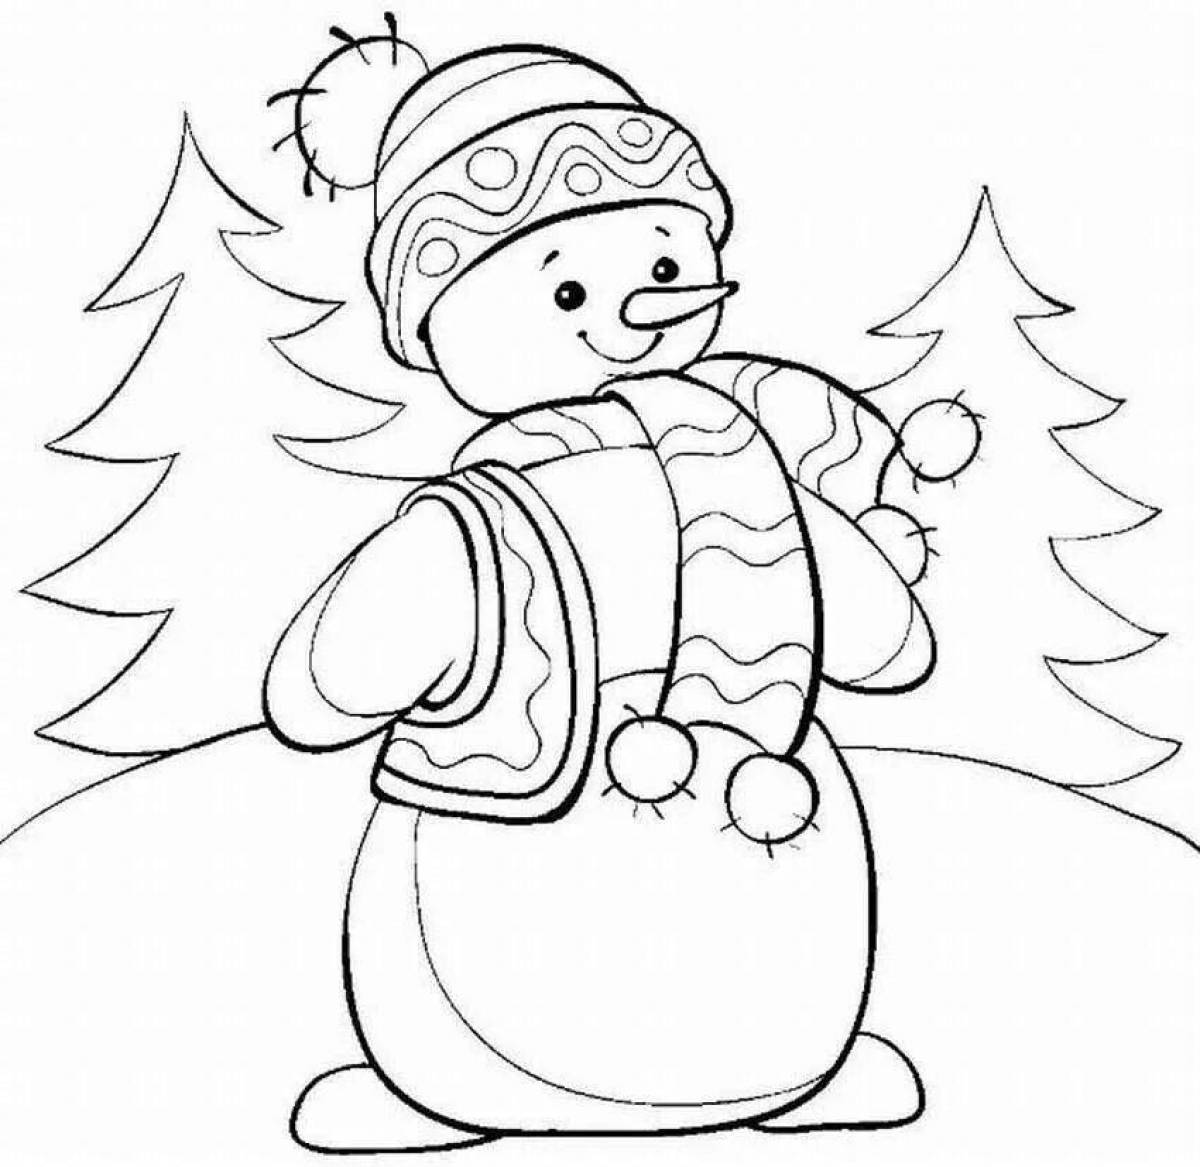 Whimsical winter coloring for children 3-4 years old